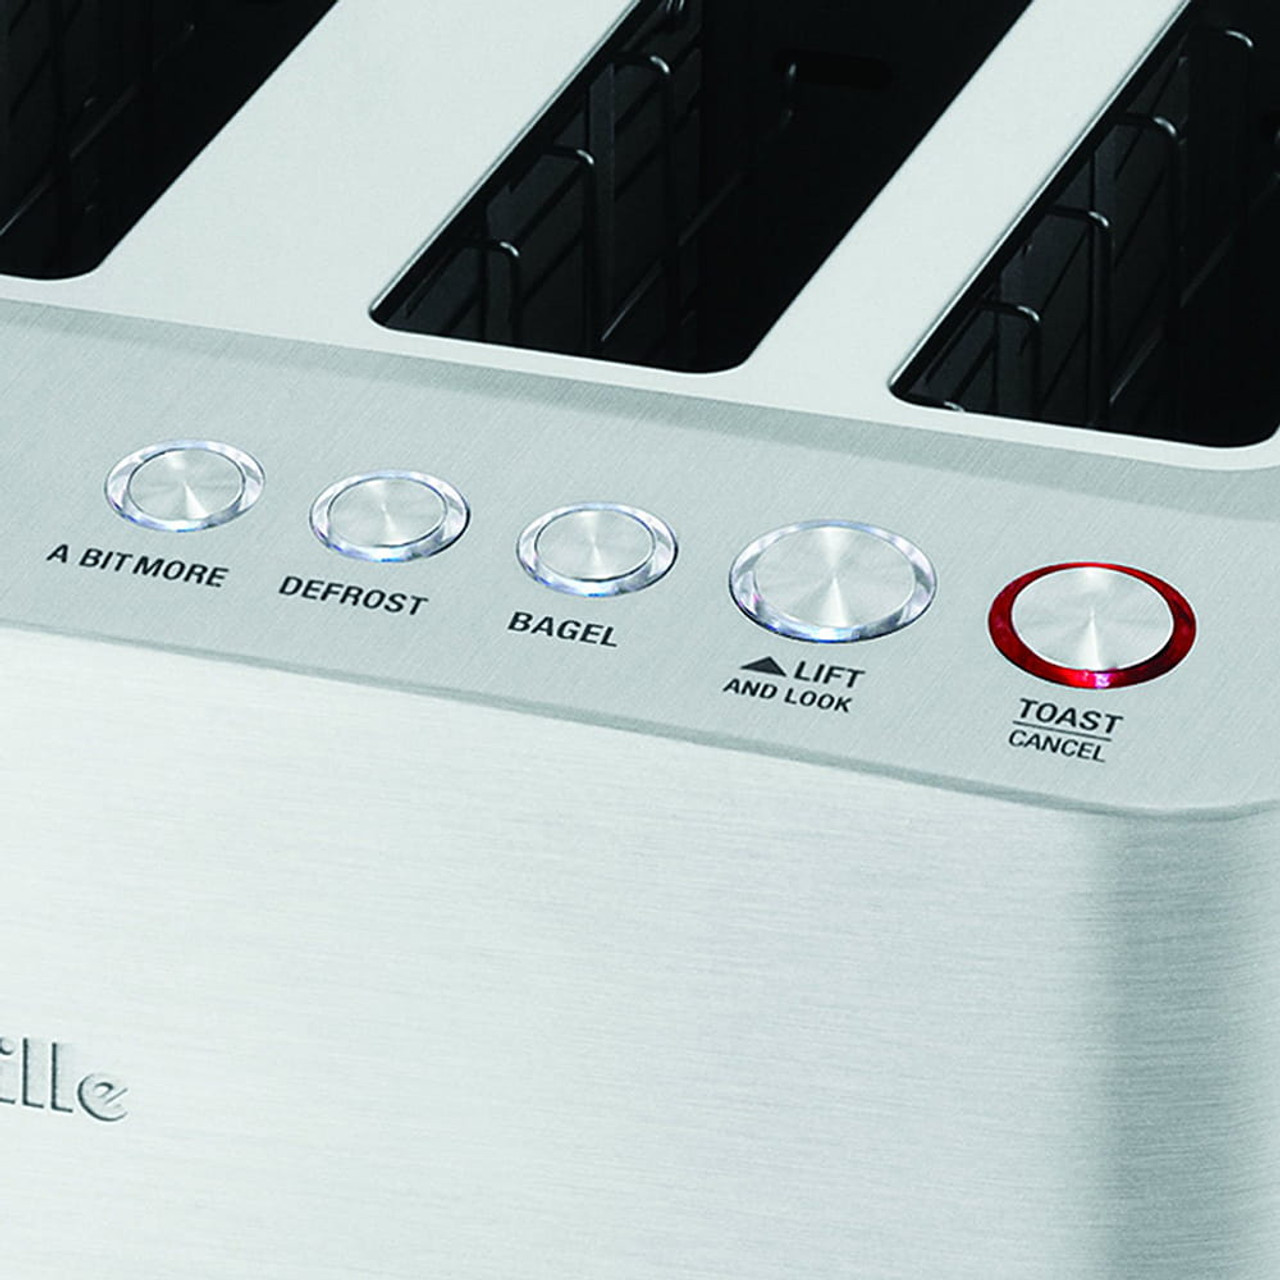 Breville 4-Slice Die-Cast Smart Toaster, Stainless Steel Review 